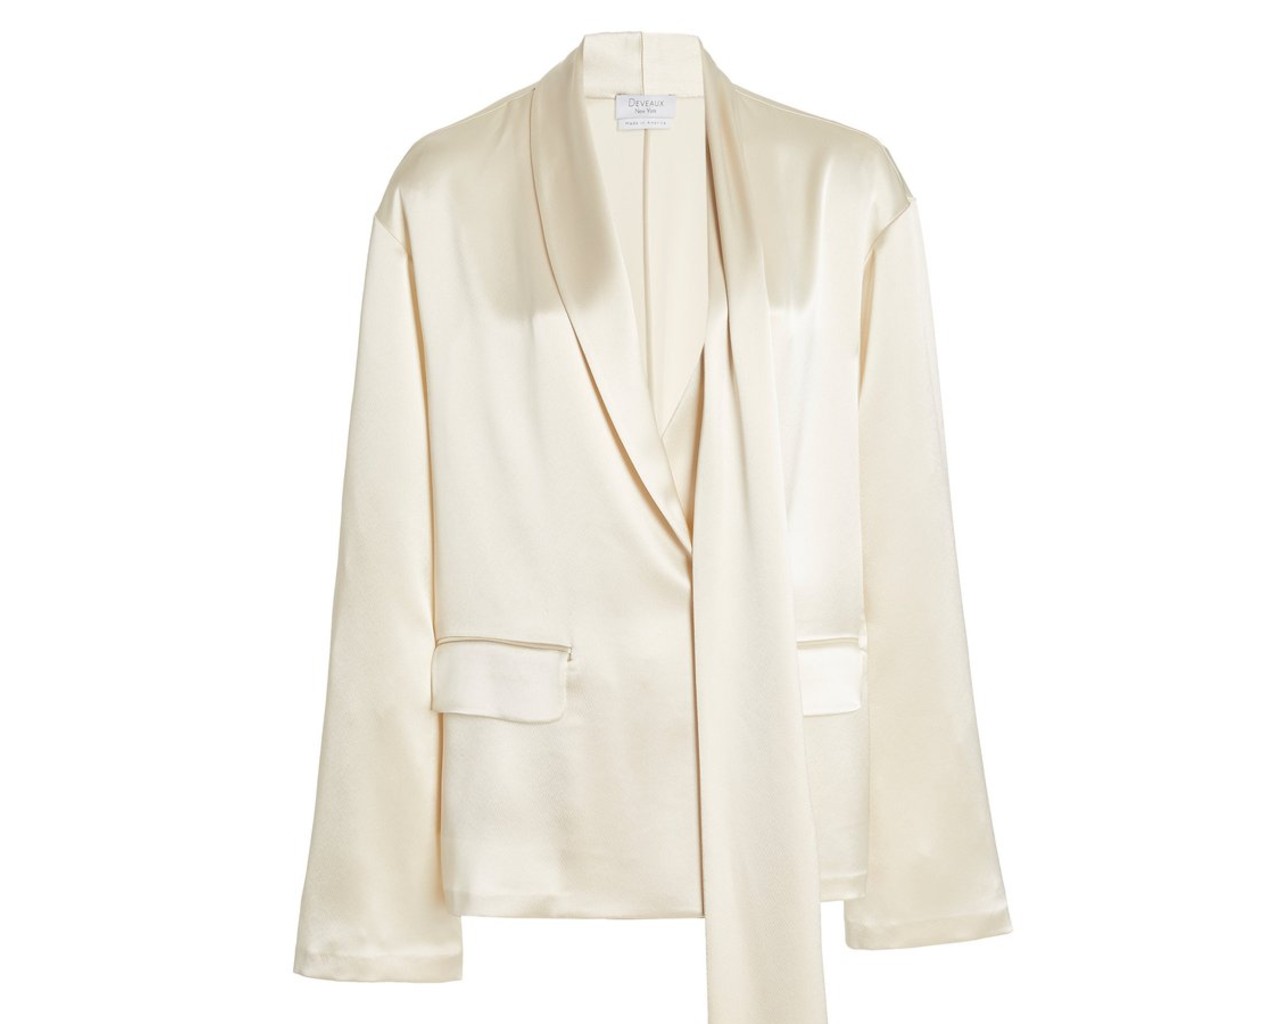 Deveaux Satin Blazer, inspired by the suffragette suit Kamala Harris wore during victory speech